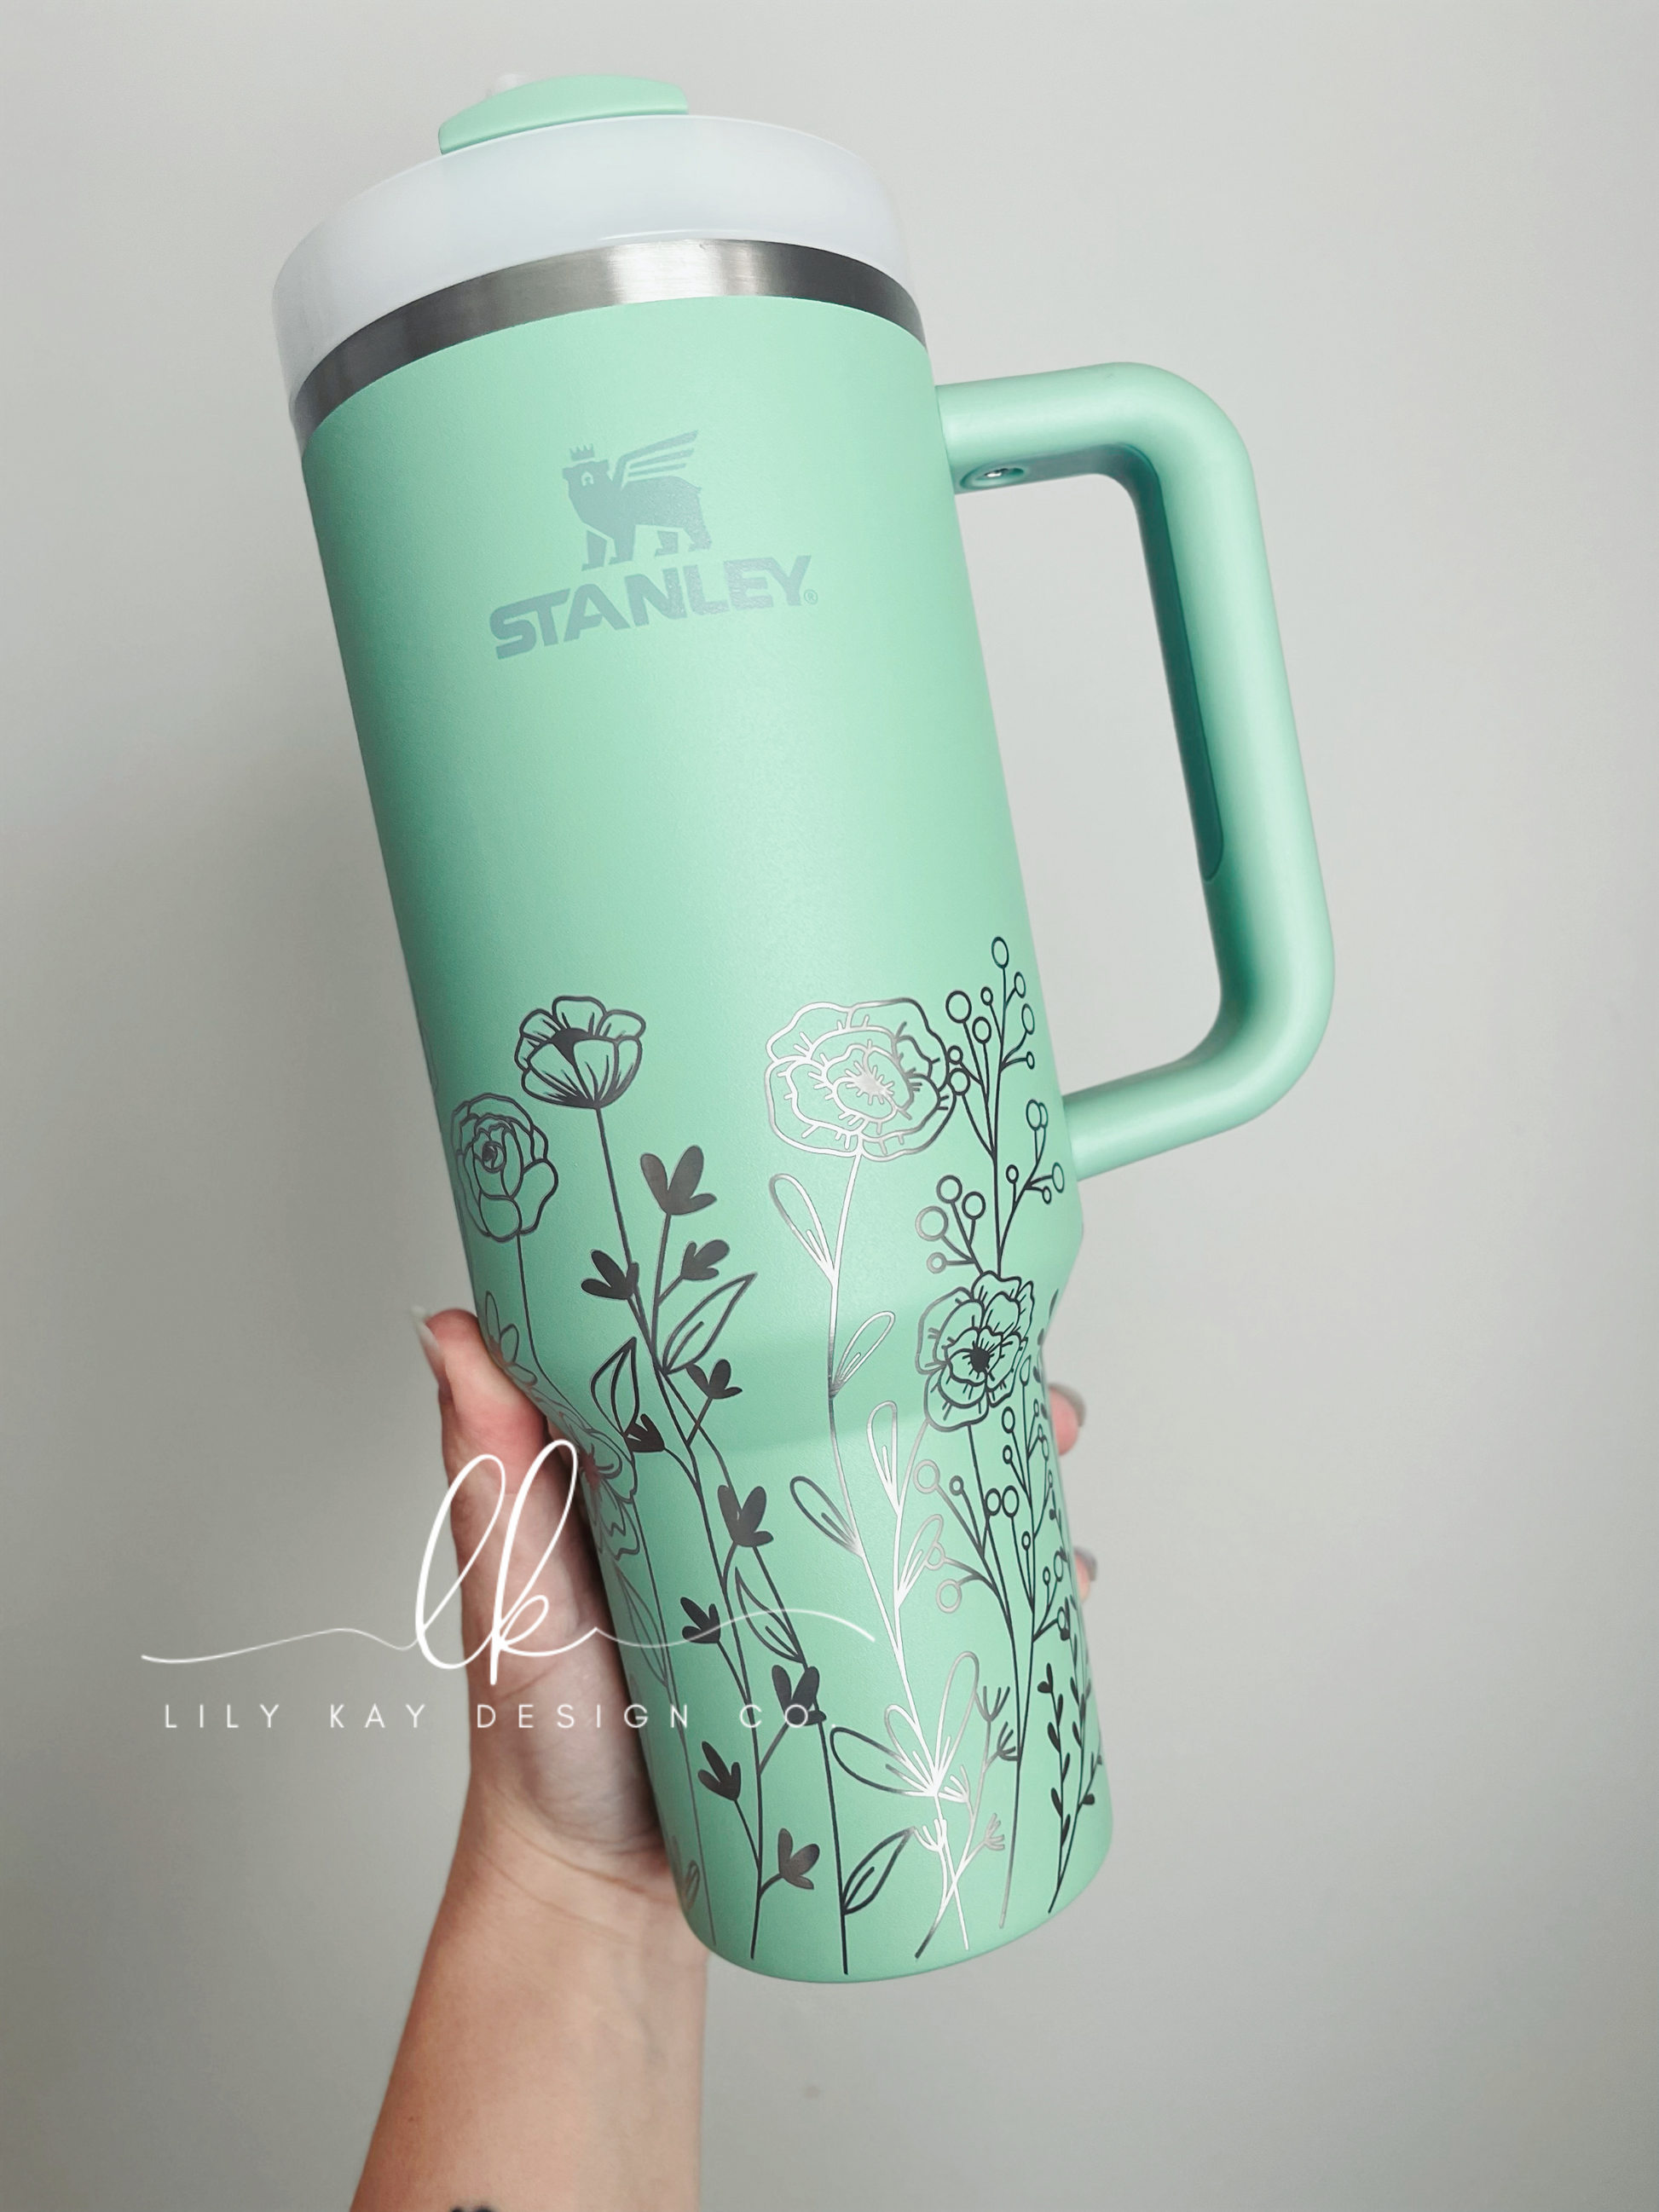 Stanley Dining, Stanley Quencher H20 Tumbler 40 Oz Jade, Color: Green